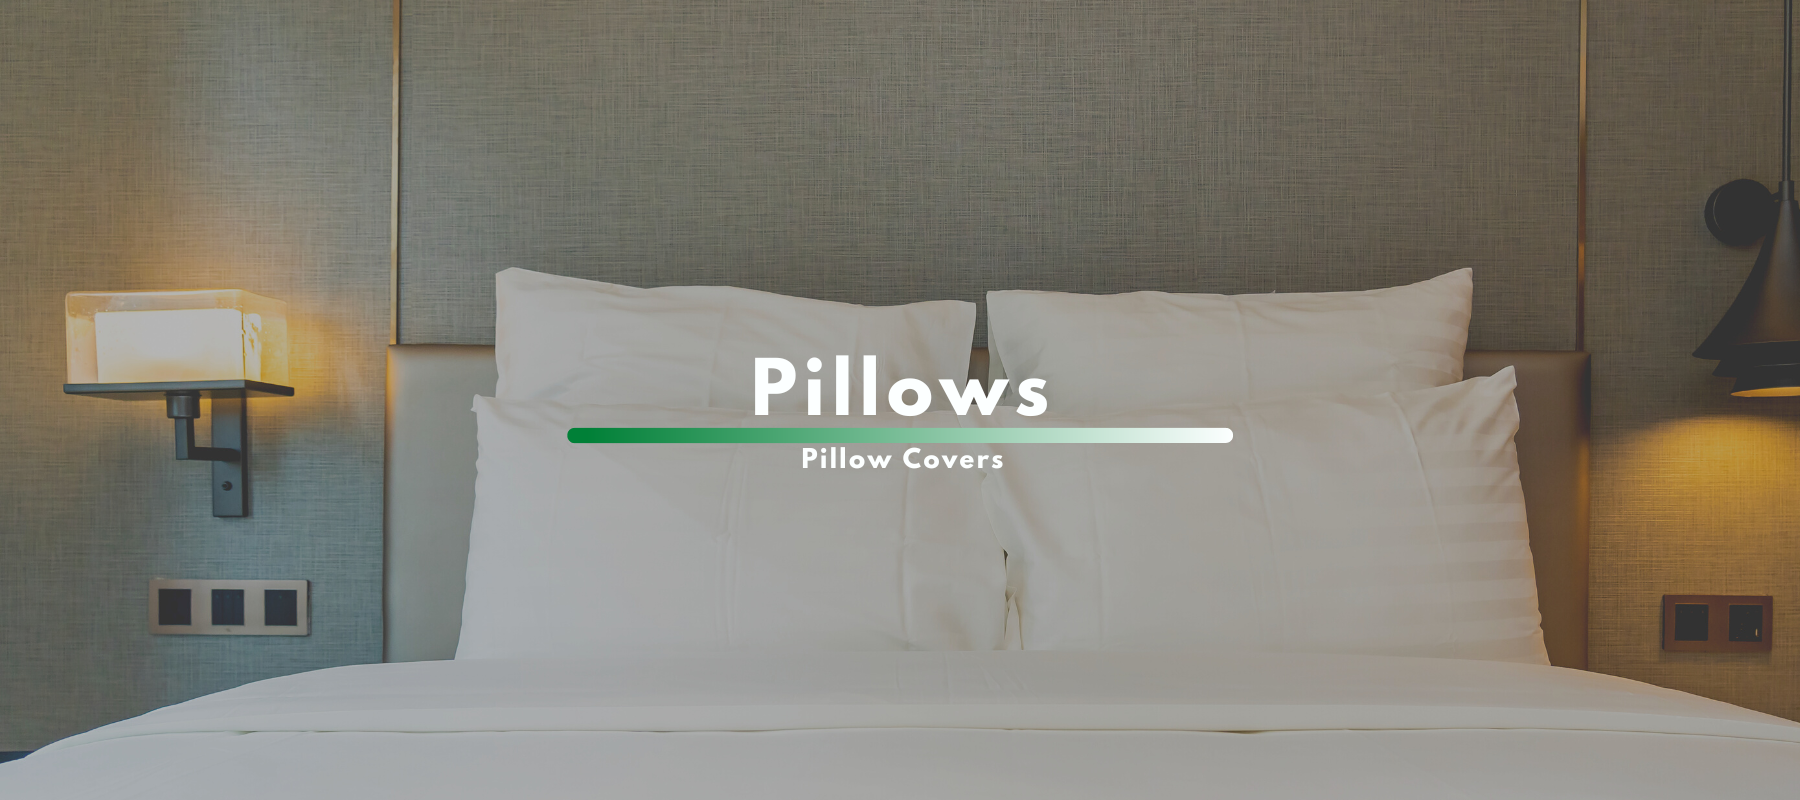 SPECIALITY PILLOWS